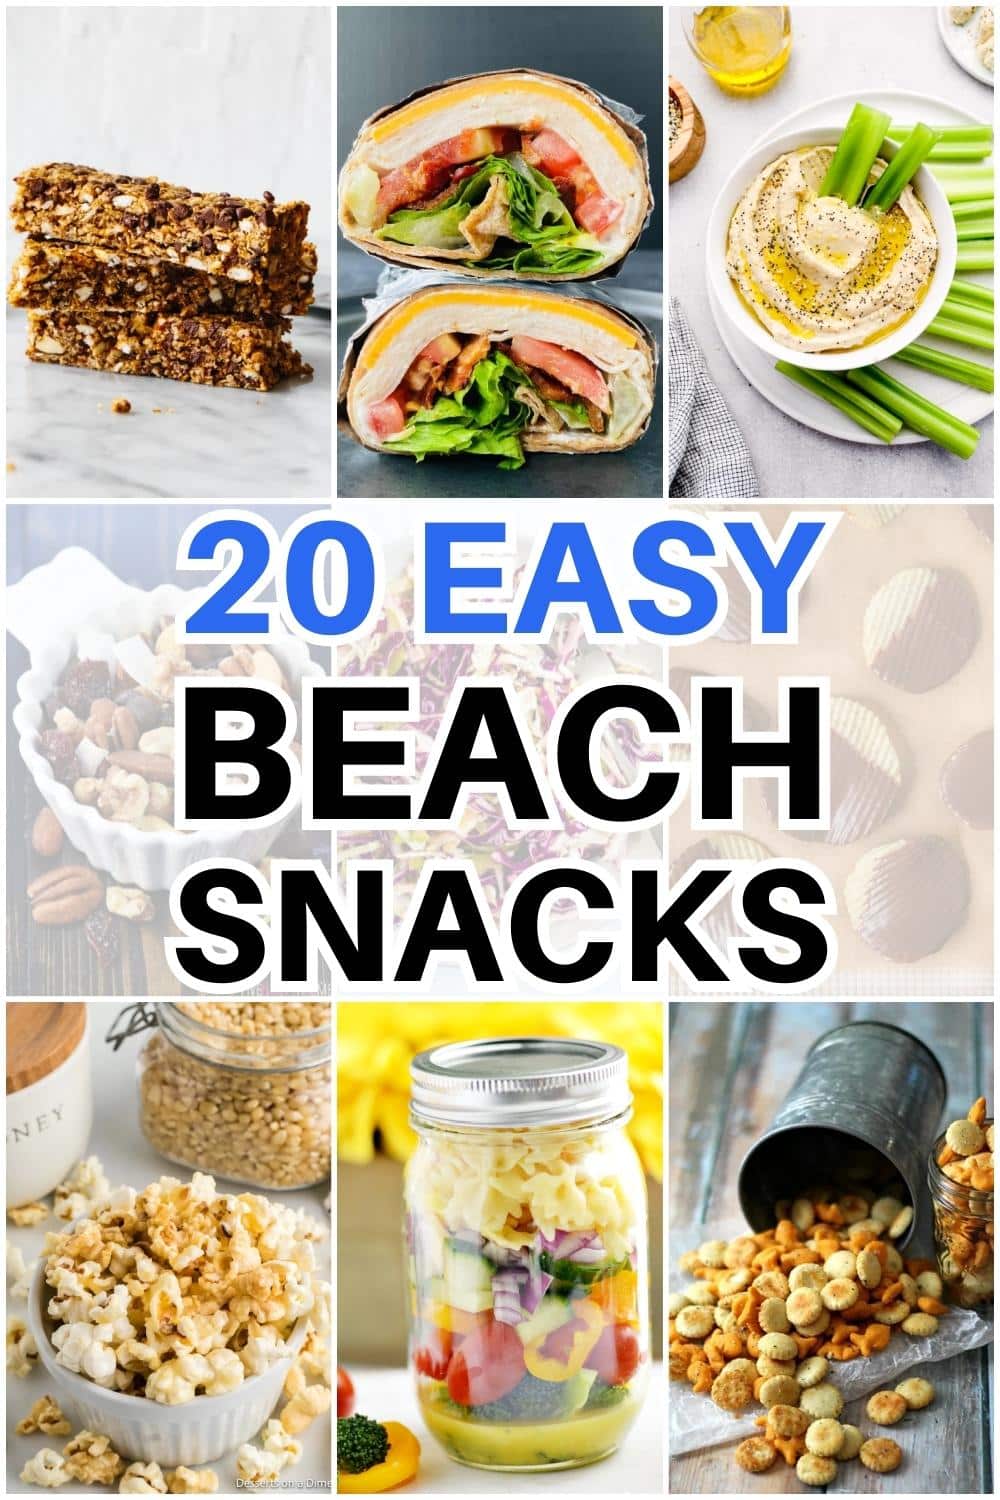 20 Best Beach Snacks To Pack For A Day On The Shore - Coastal Wandering